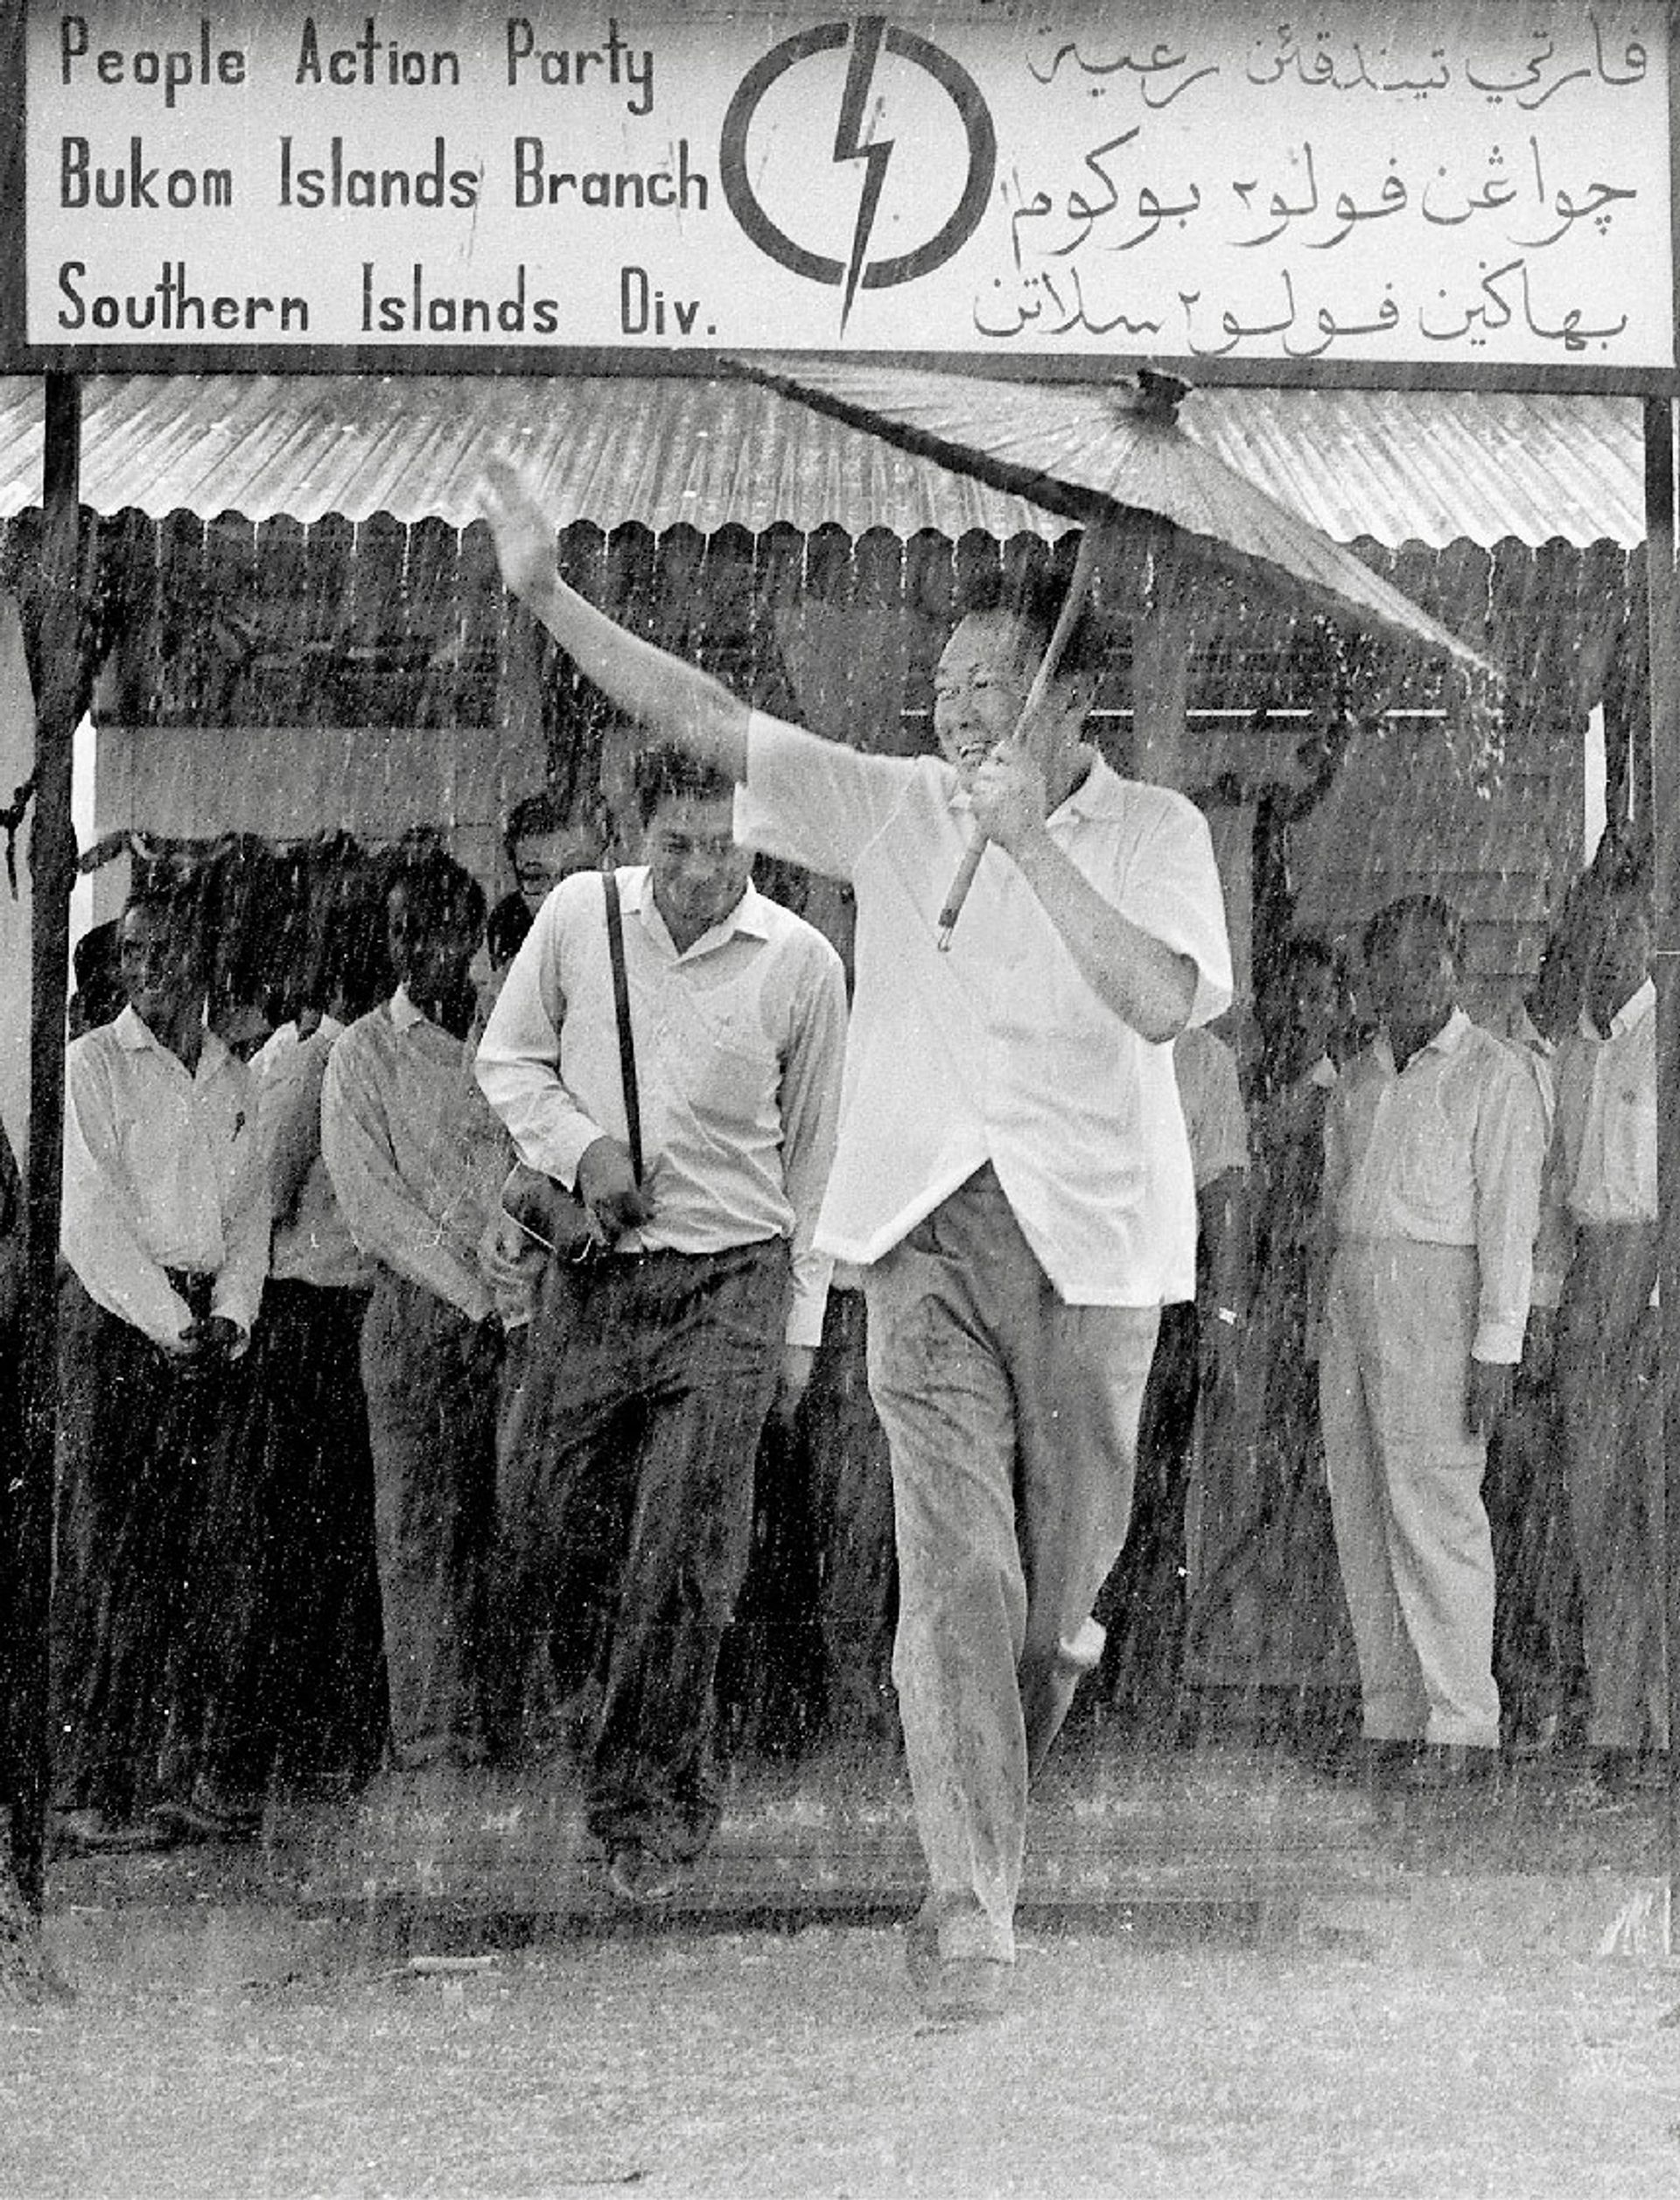 With a small umbrella in hand, Mr Lee braved the rain at the opening of the new People’s Action Party branch on Pulau Bukom Kechil, part of the Southern Islands, on April 3, 1966. It was set up to strengthen local grassroots. ST Photo: Mak Kian Seng